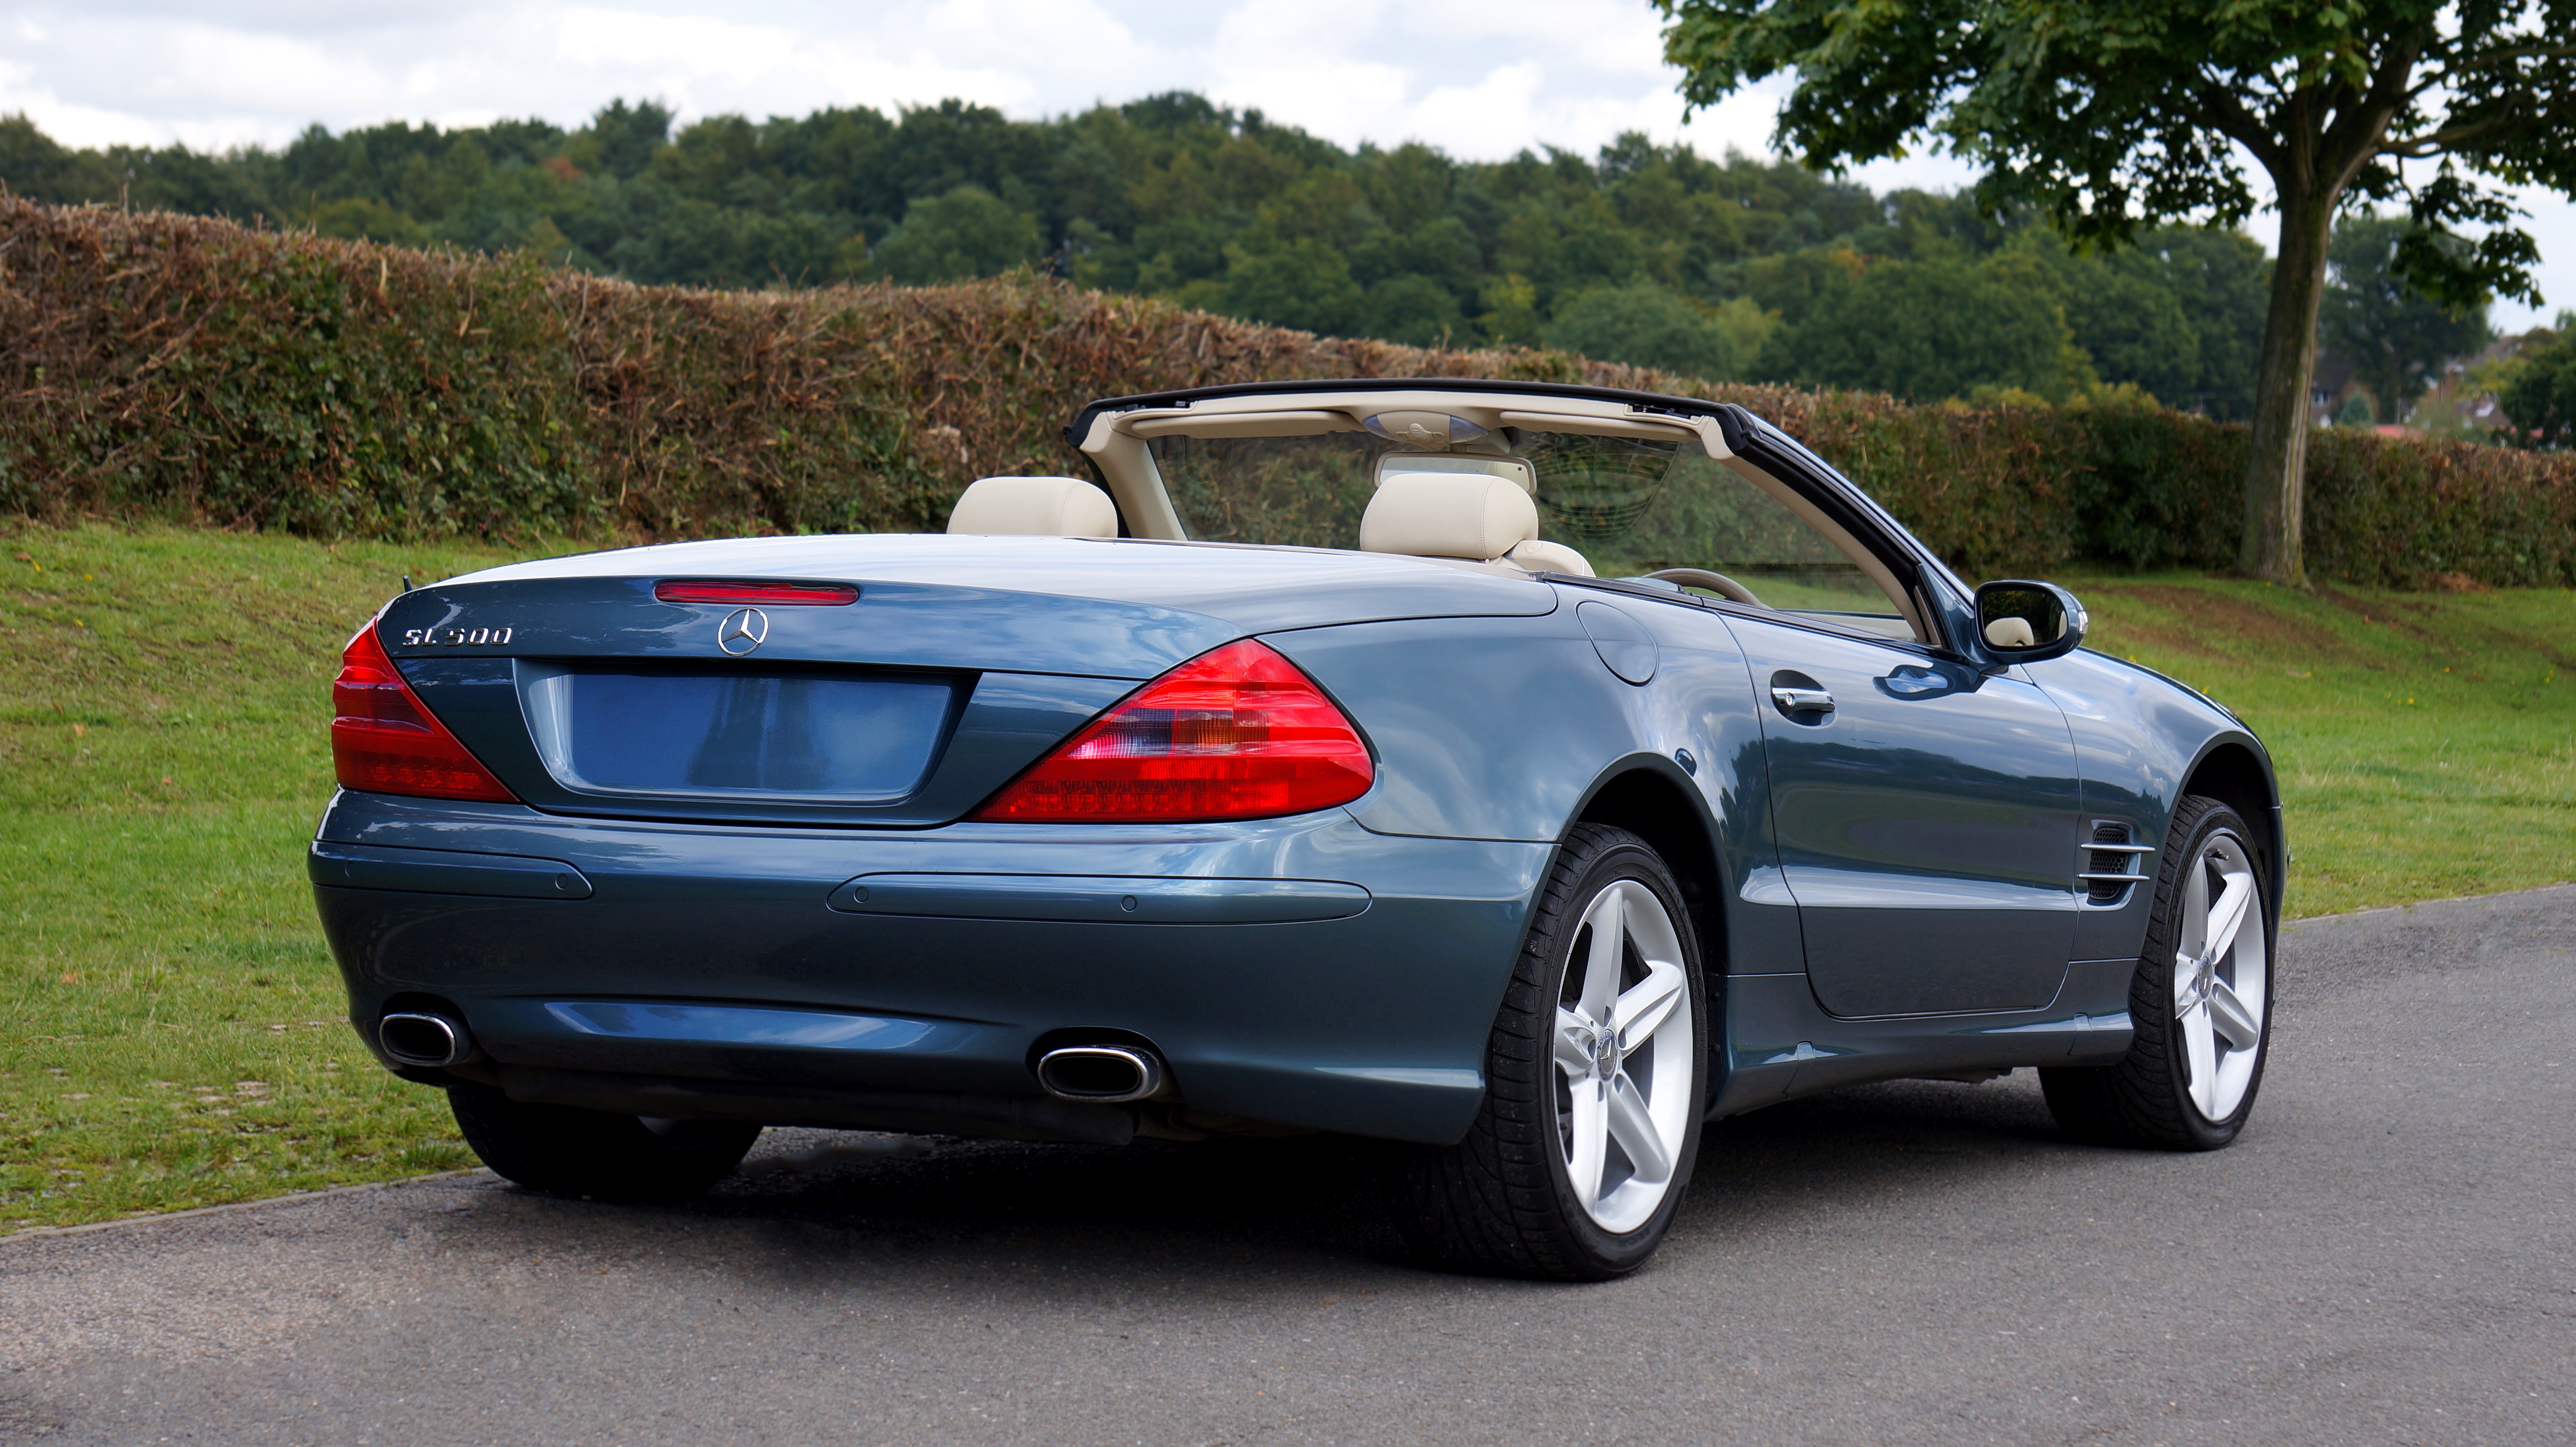 Blue Mercedes-Benz SL500 by MikeBirdy